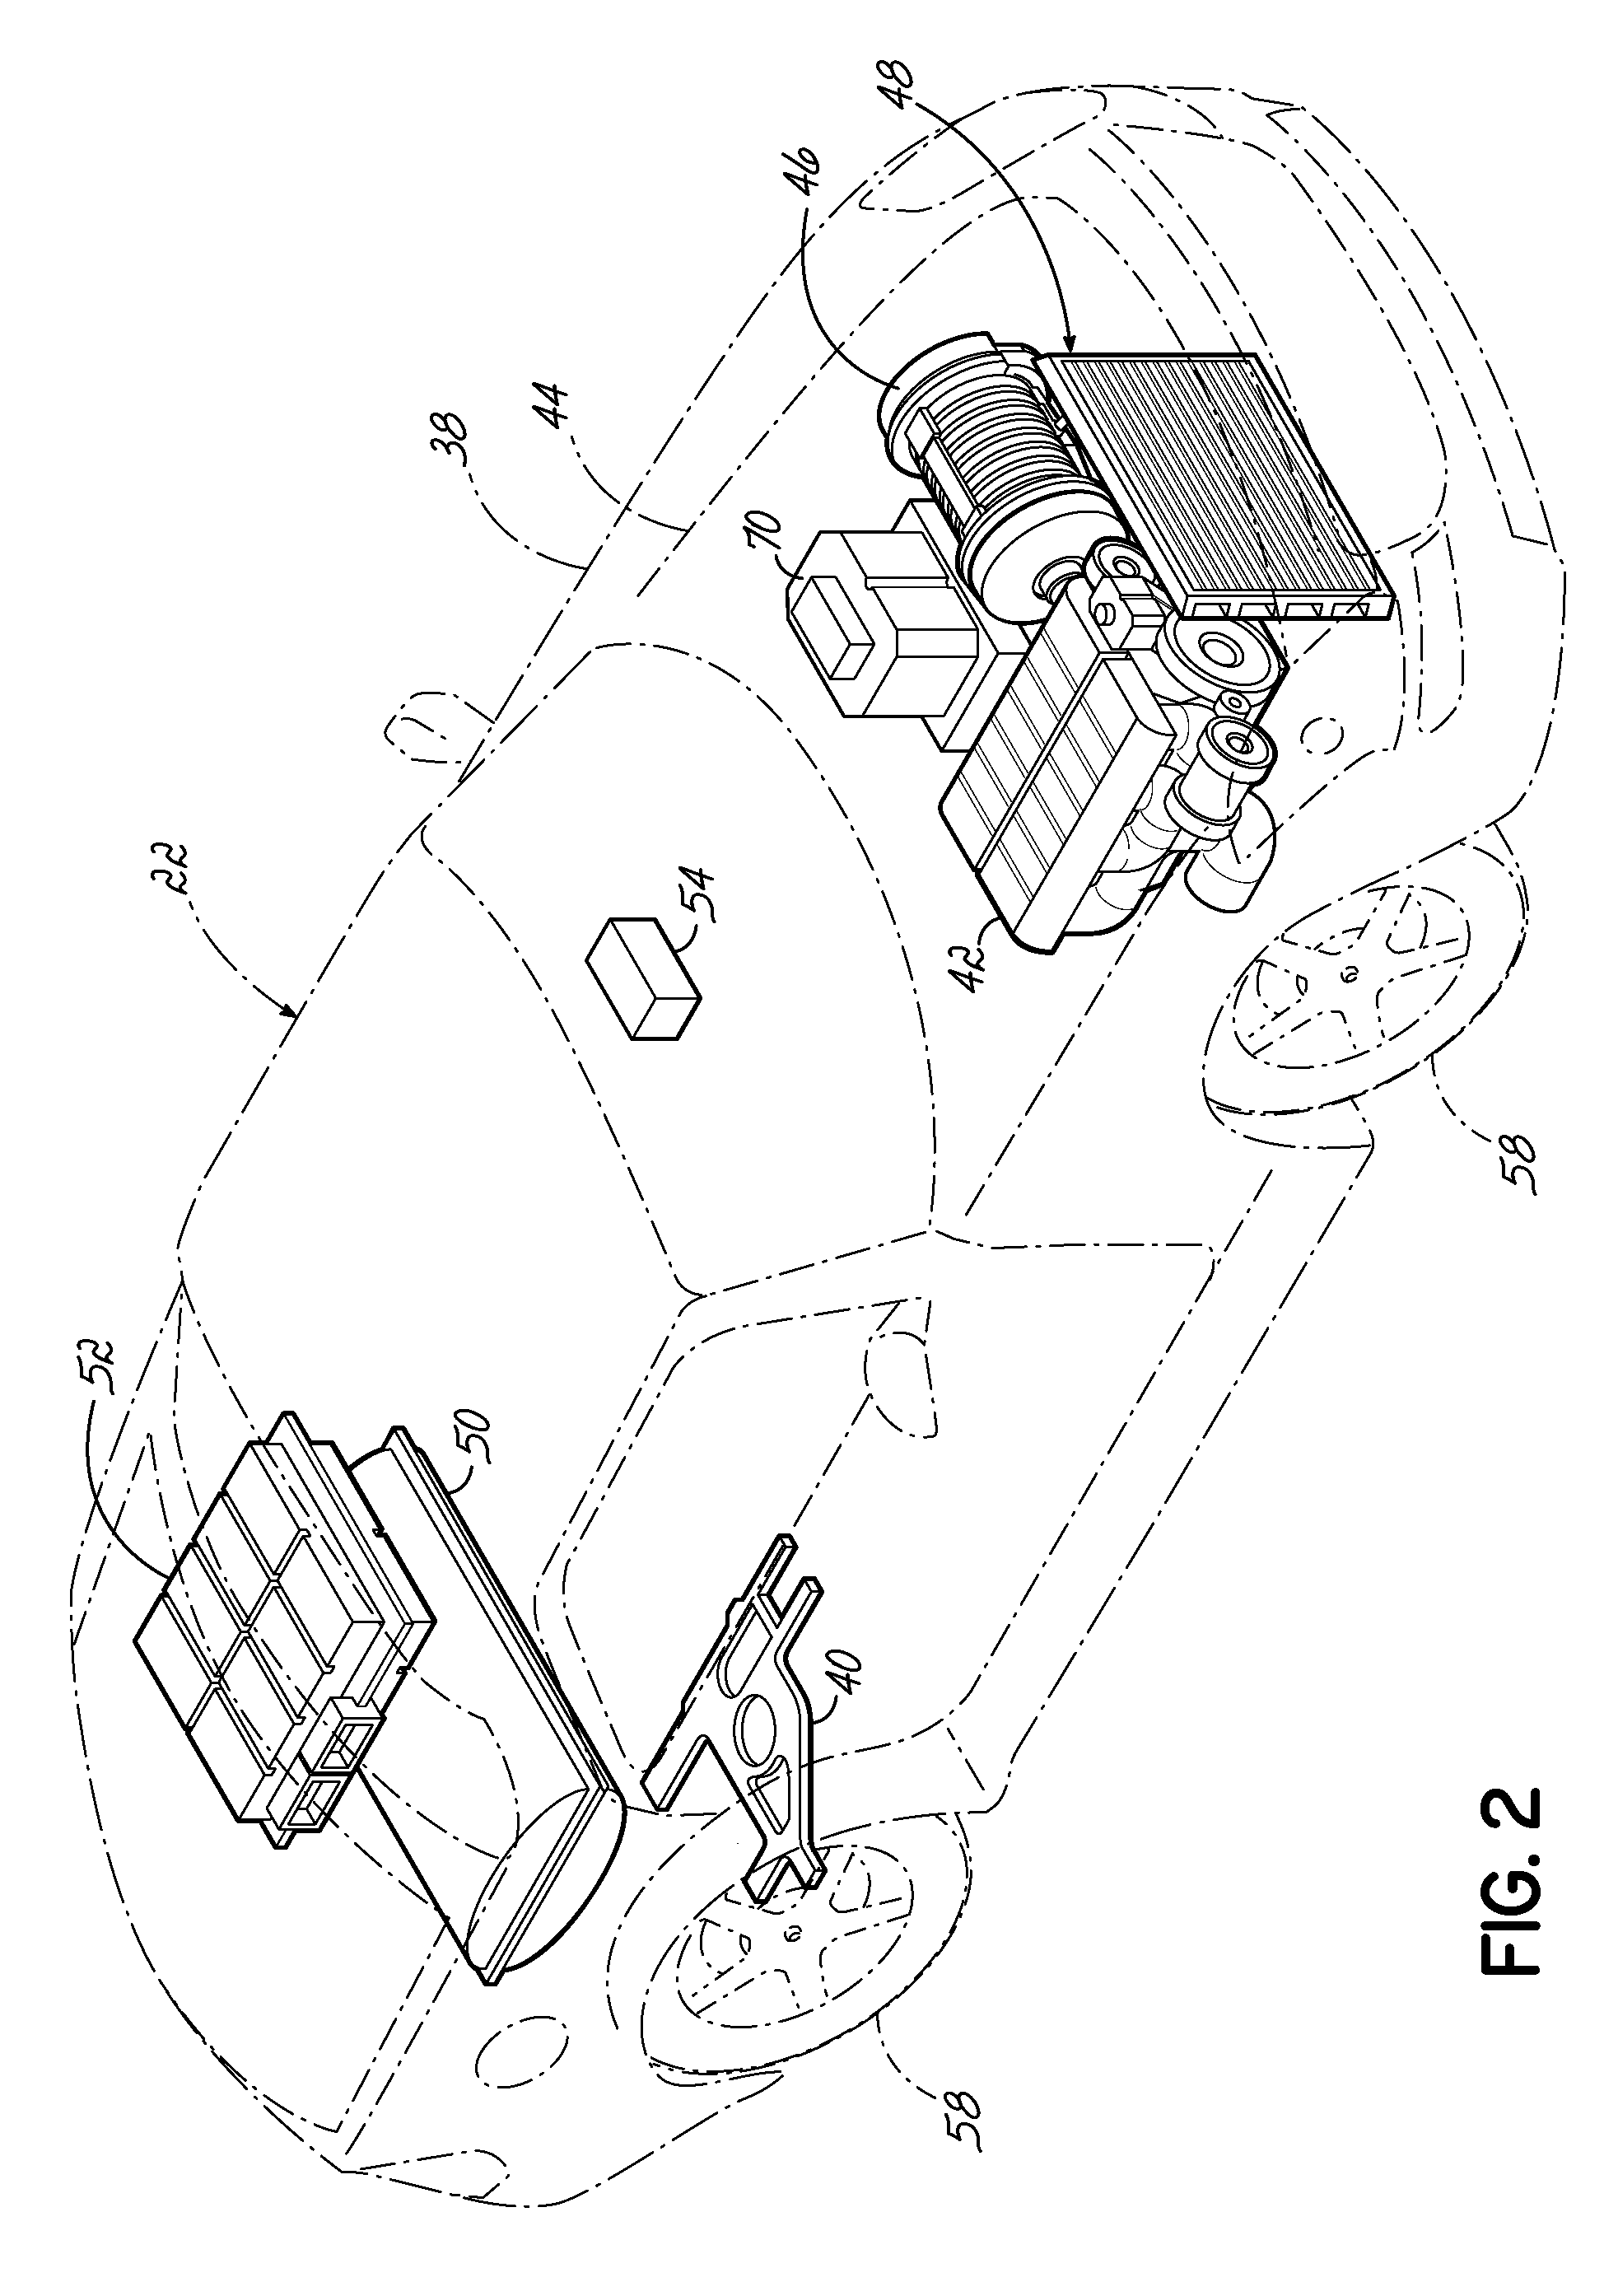 Method and system for electric vehicle battery prognostics and health management